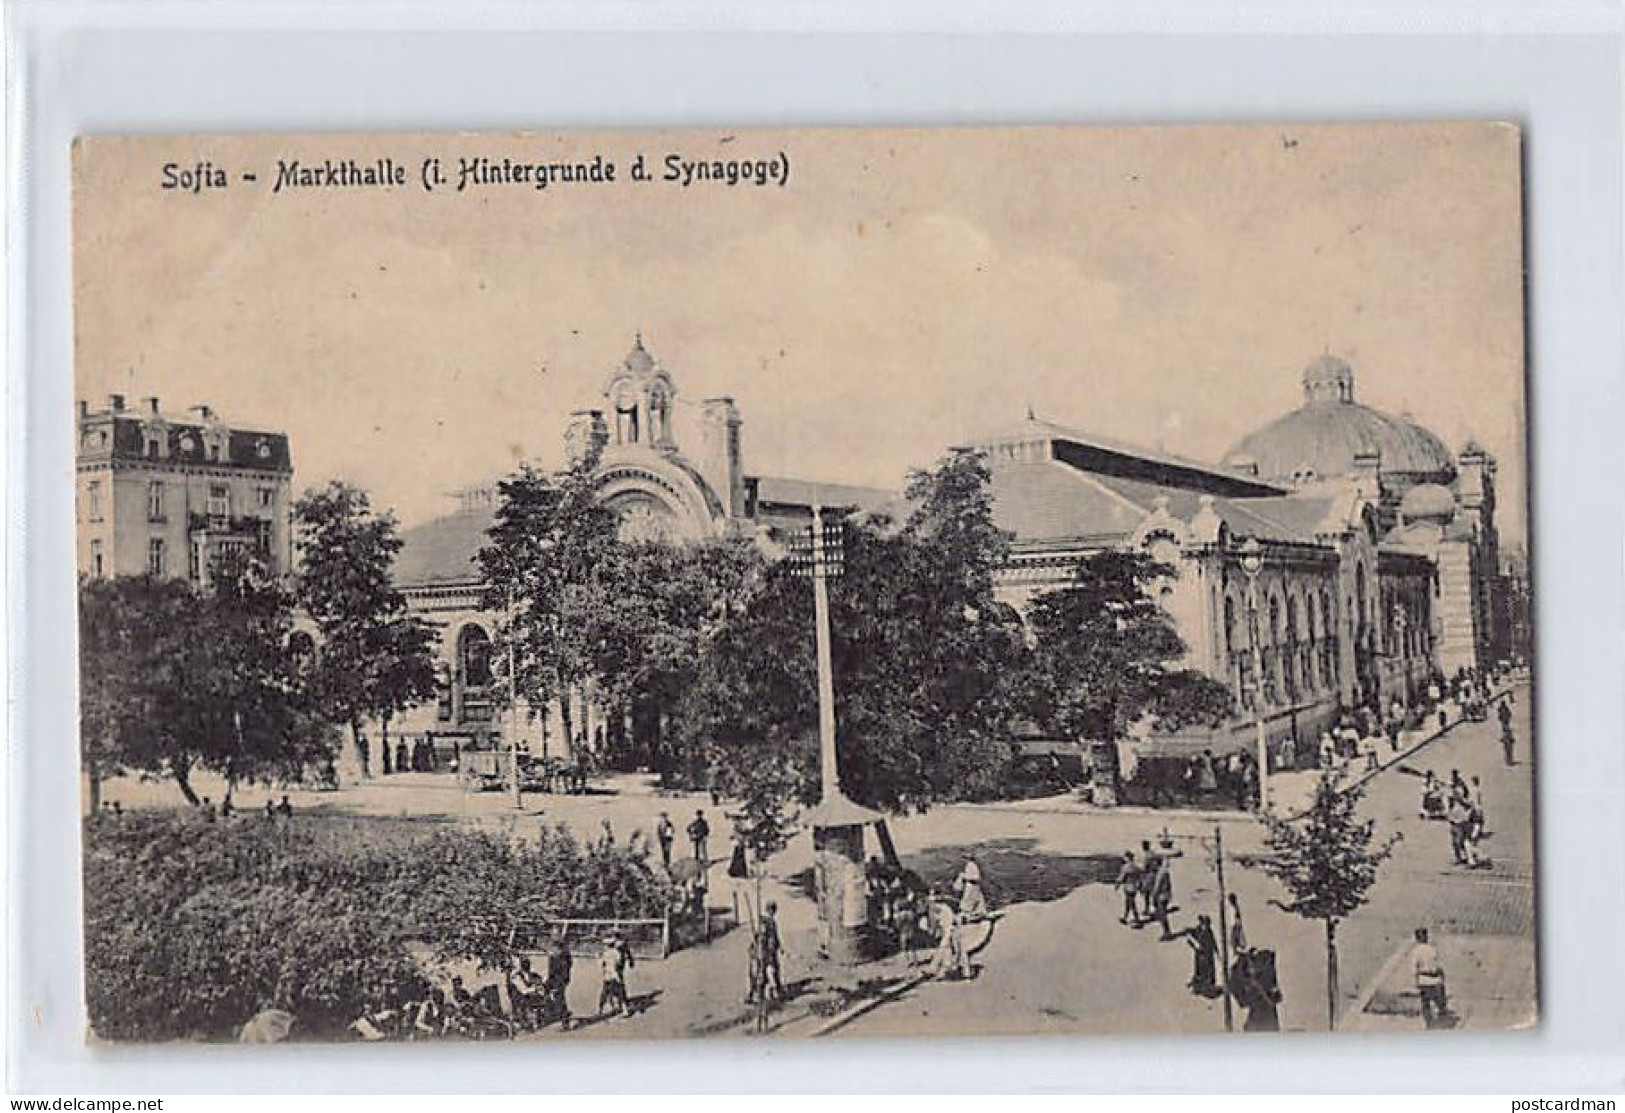 JUDAICA - Bulgaria - SOFIA - The Market Square With The Synagogue In The Background - Publ. Franz Ziegner 44 - Jewish